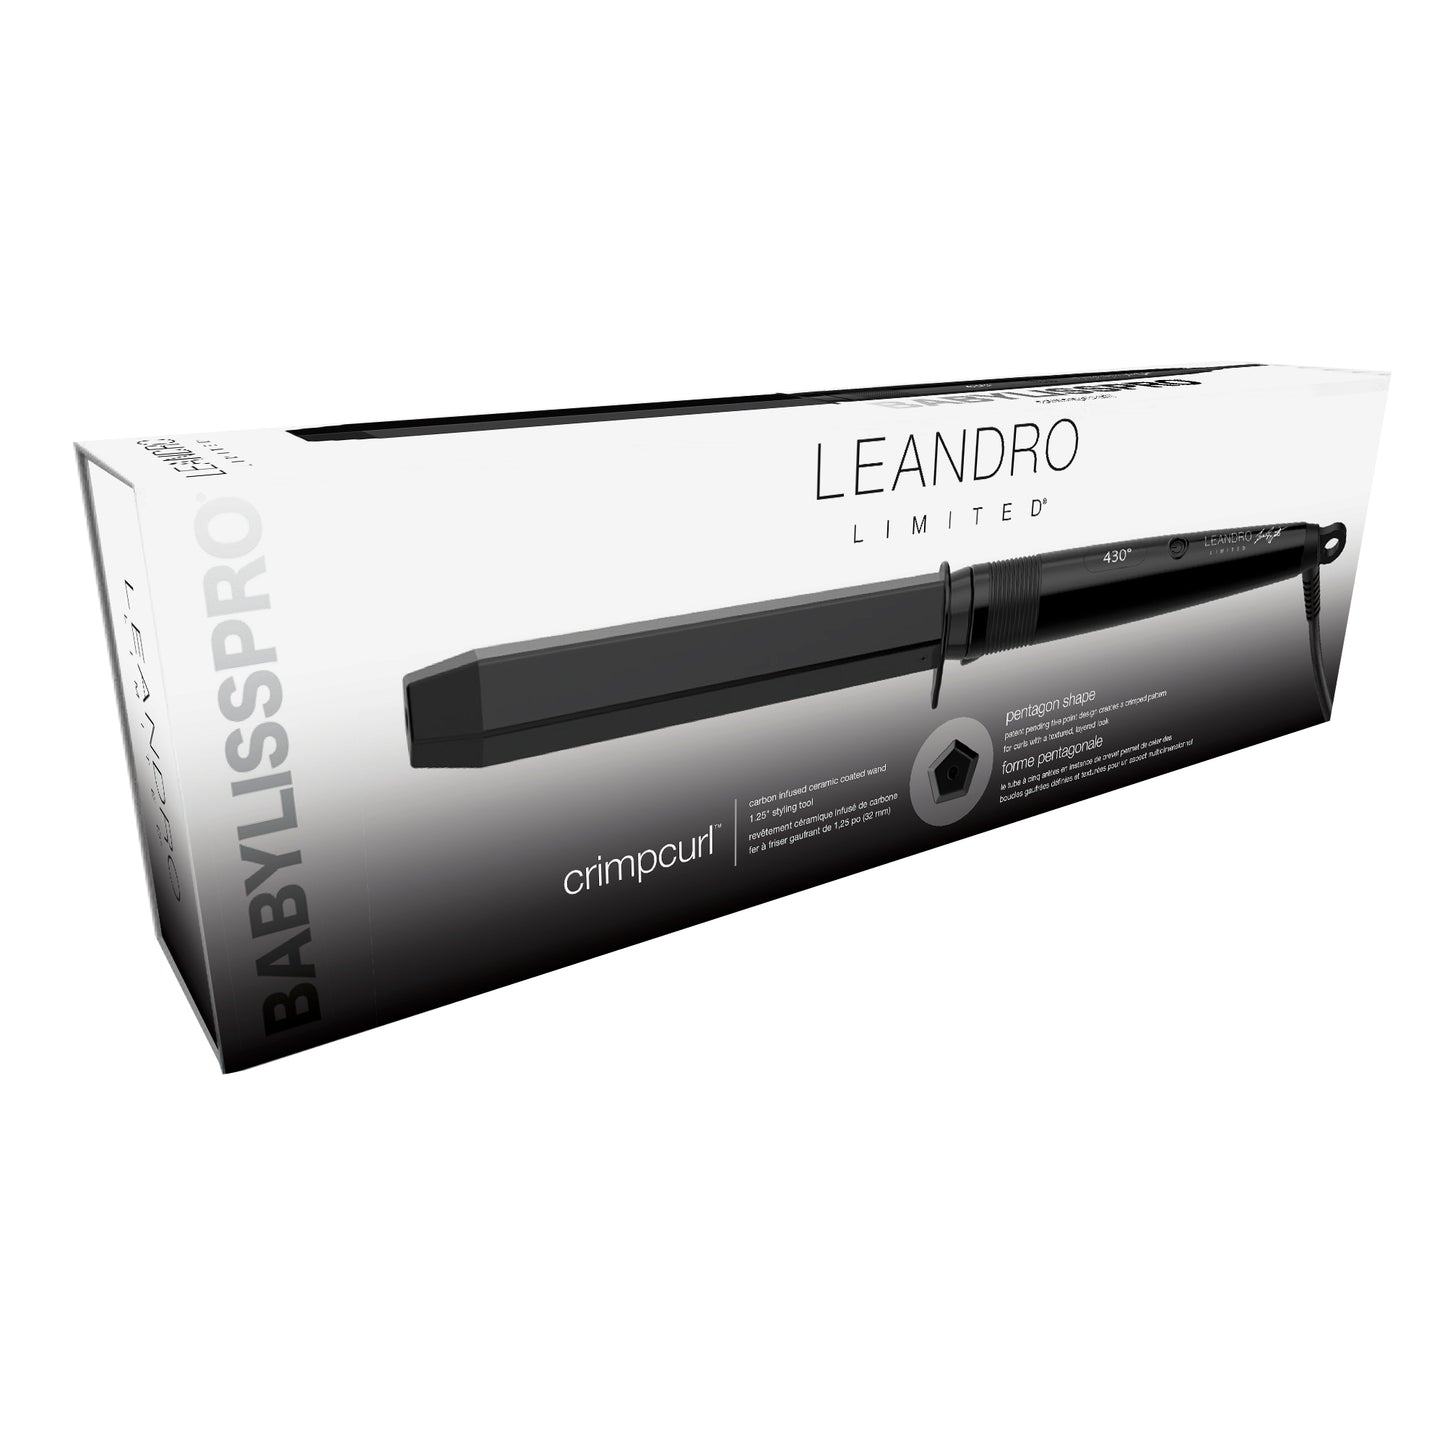 Leandro Limited Clampless Curling Iron 1.25"